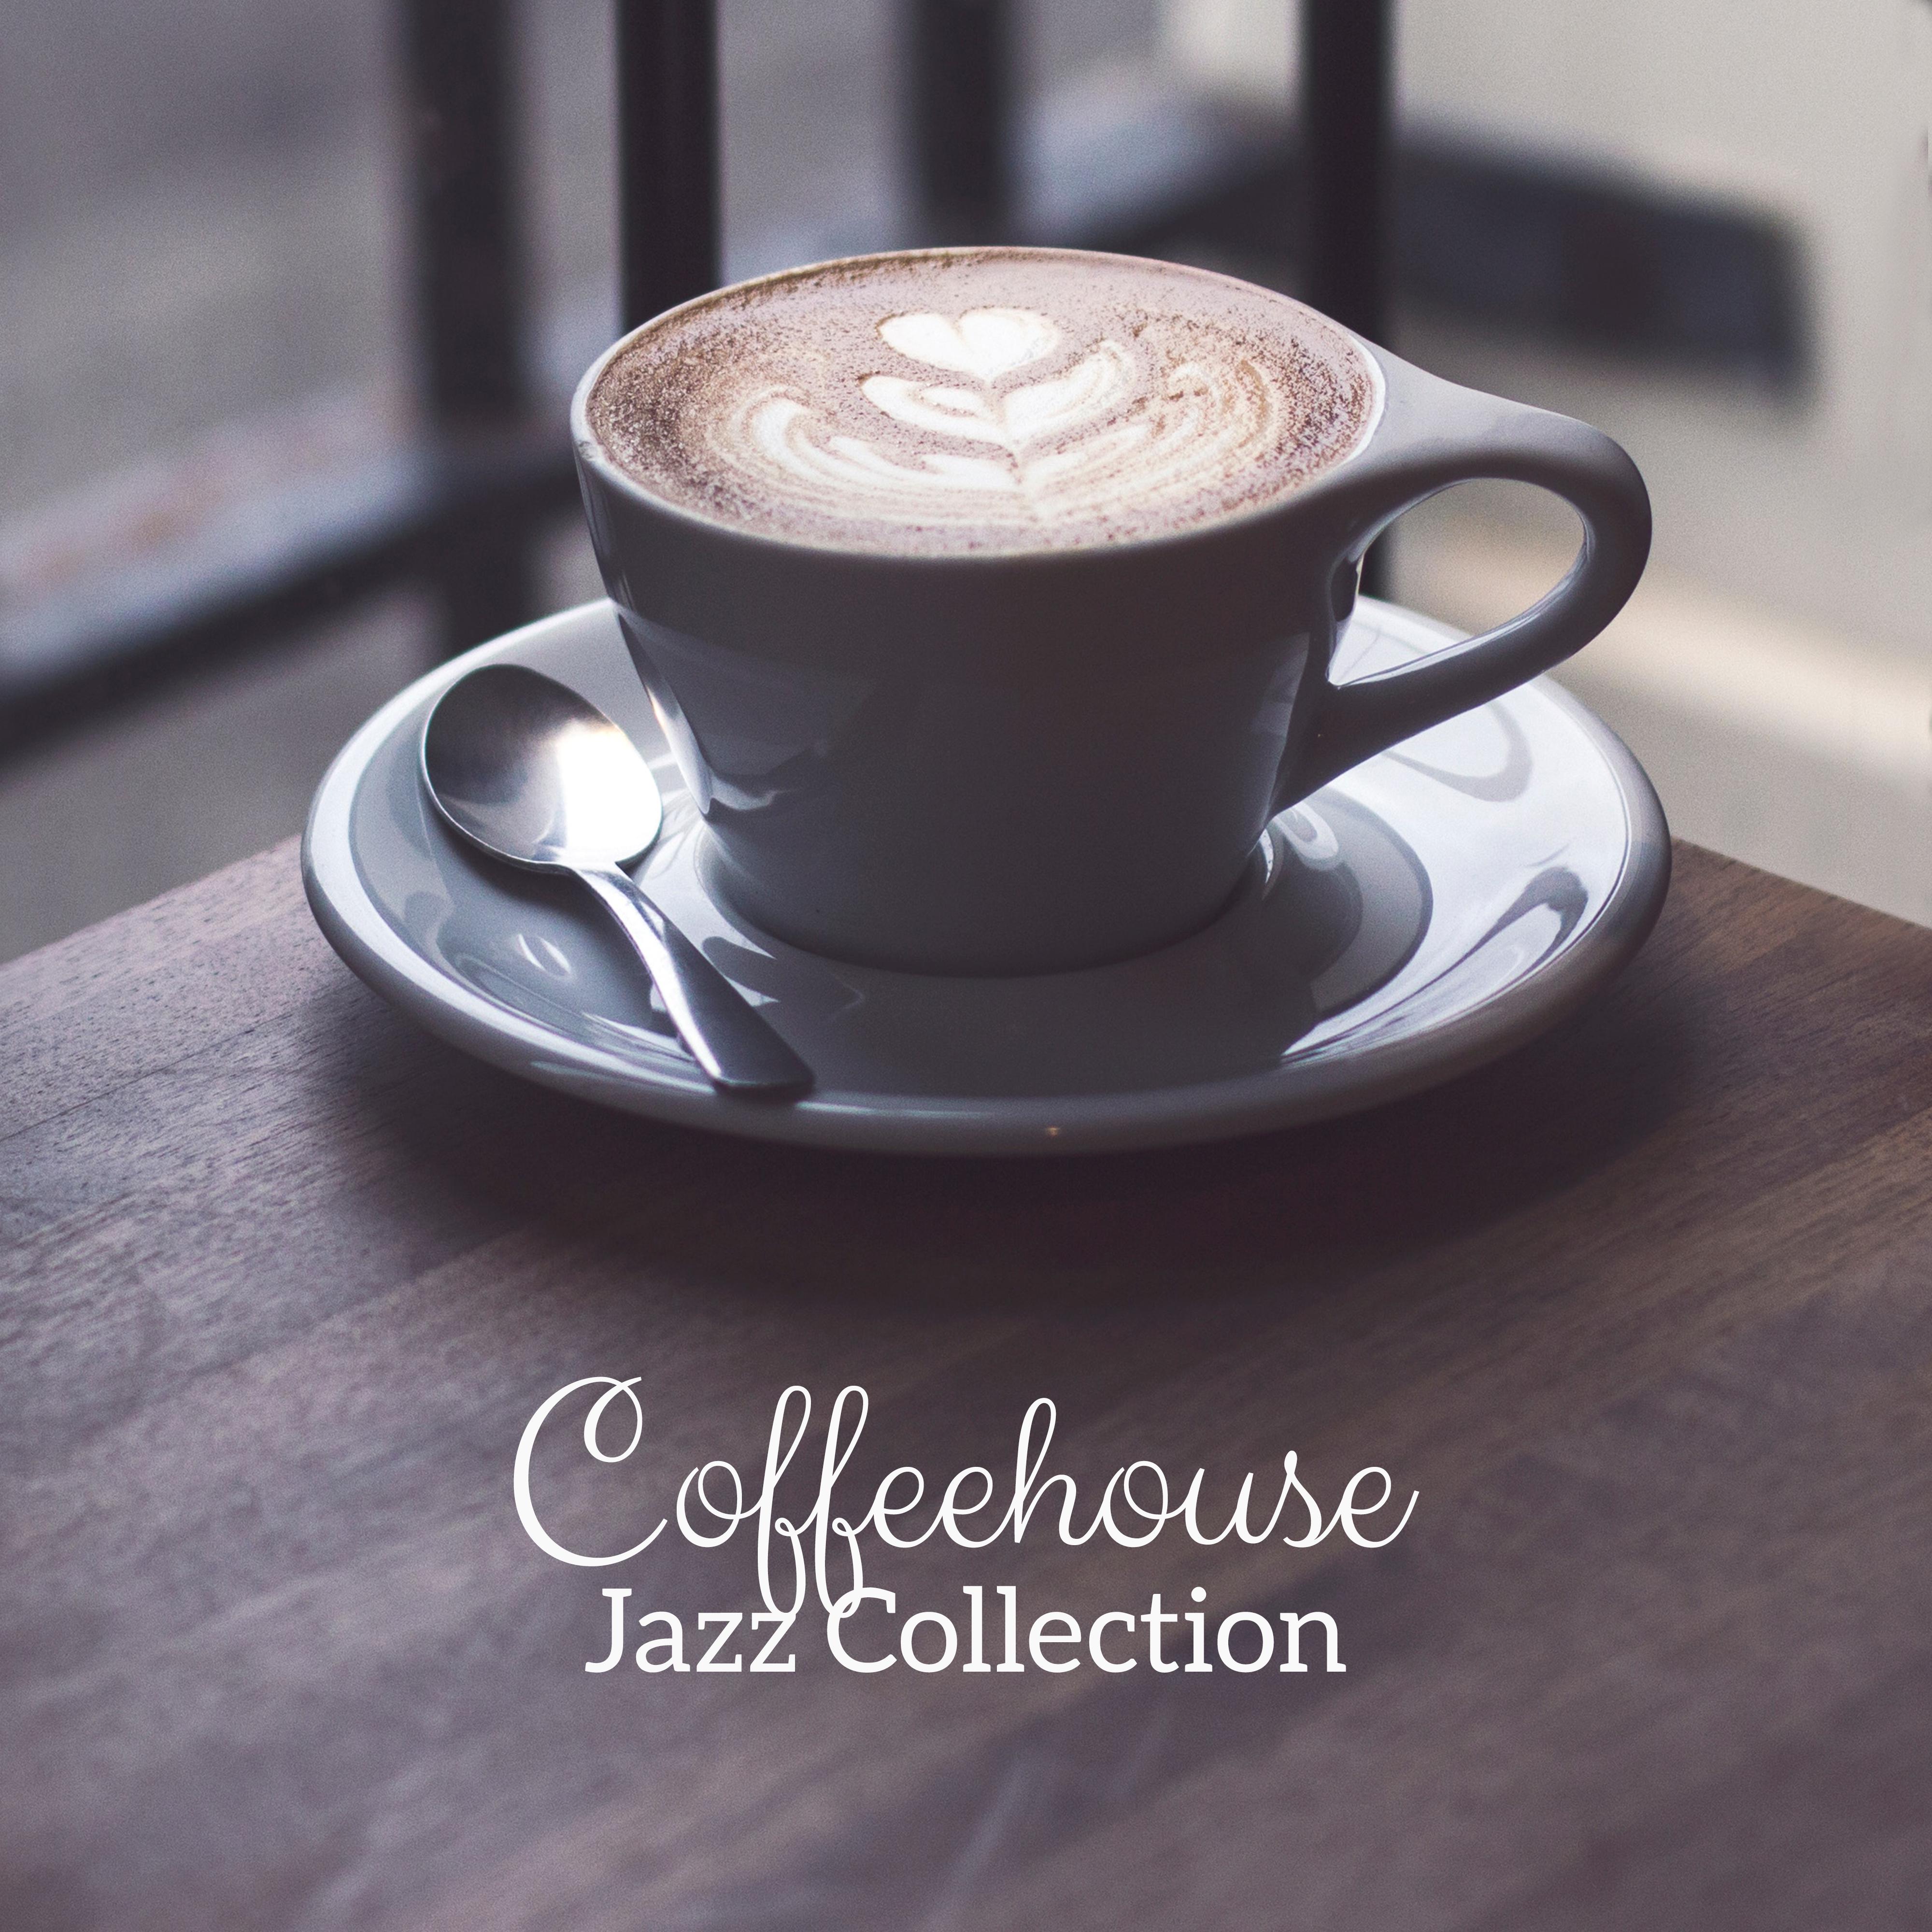 Coffeehouse Jazz Collection - 15 Carefully Selected Songs Perfect for Coffee, Social Gatherings and Breaks at Work